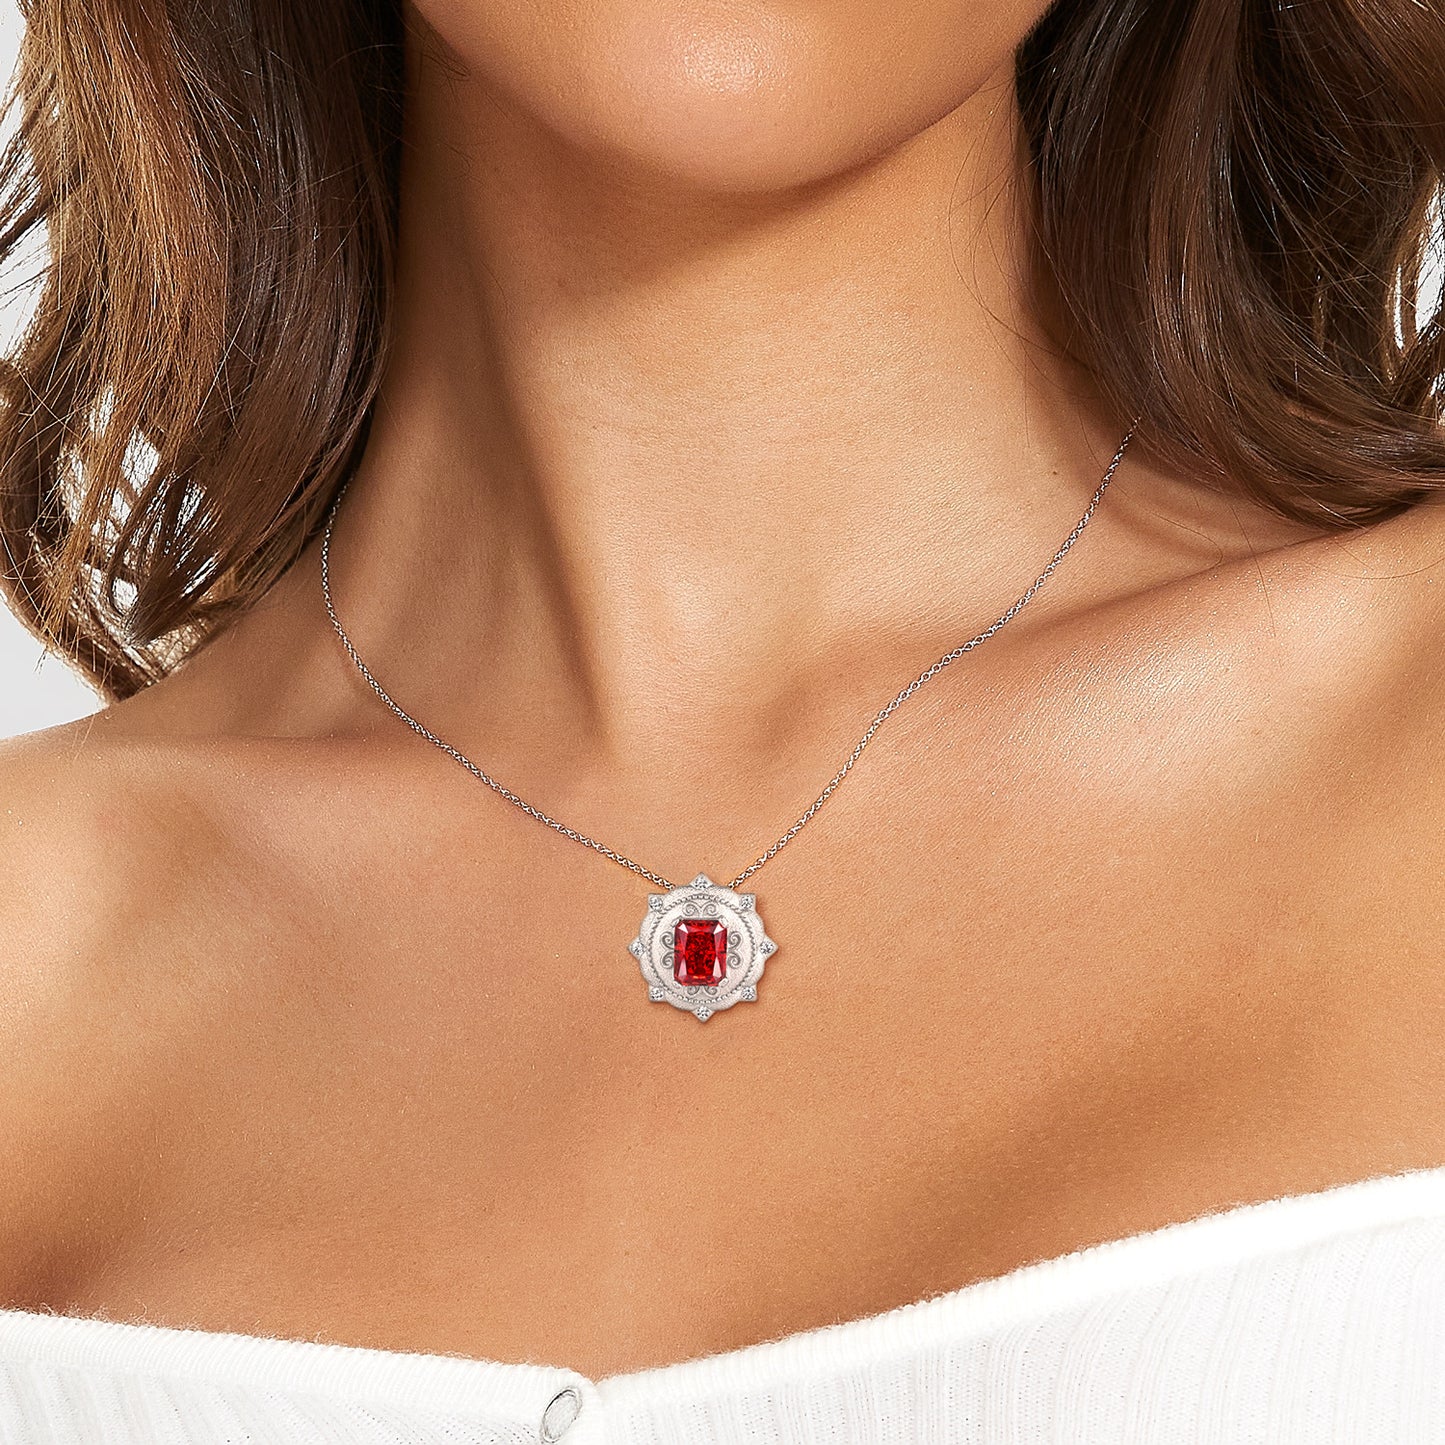 Palace Style Carved Round Pendant Rectangle Red Zircon Silver Necklace